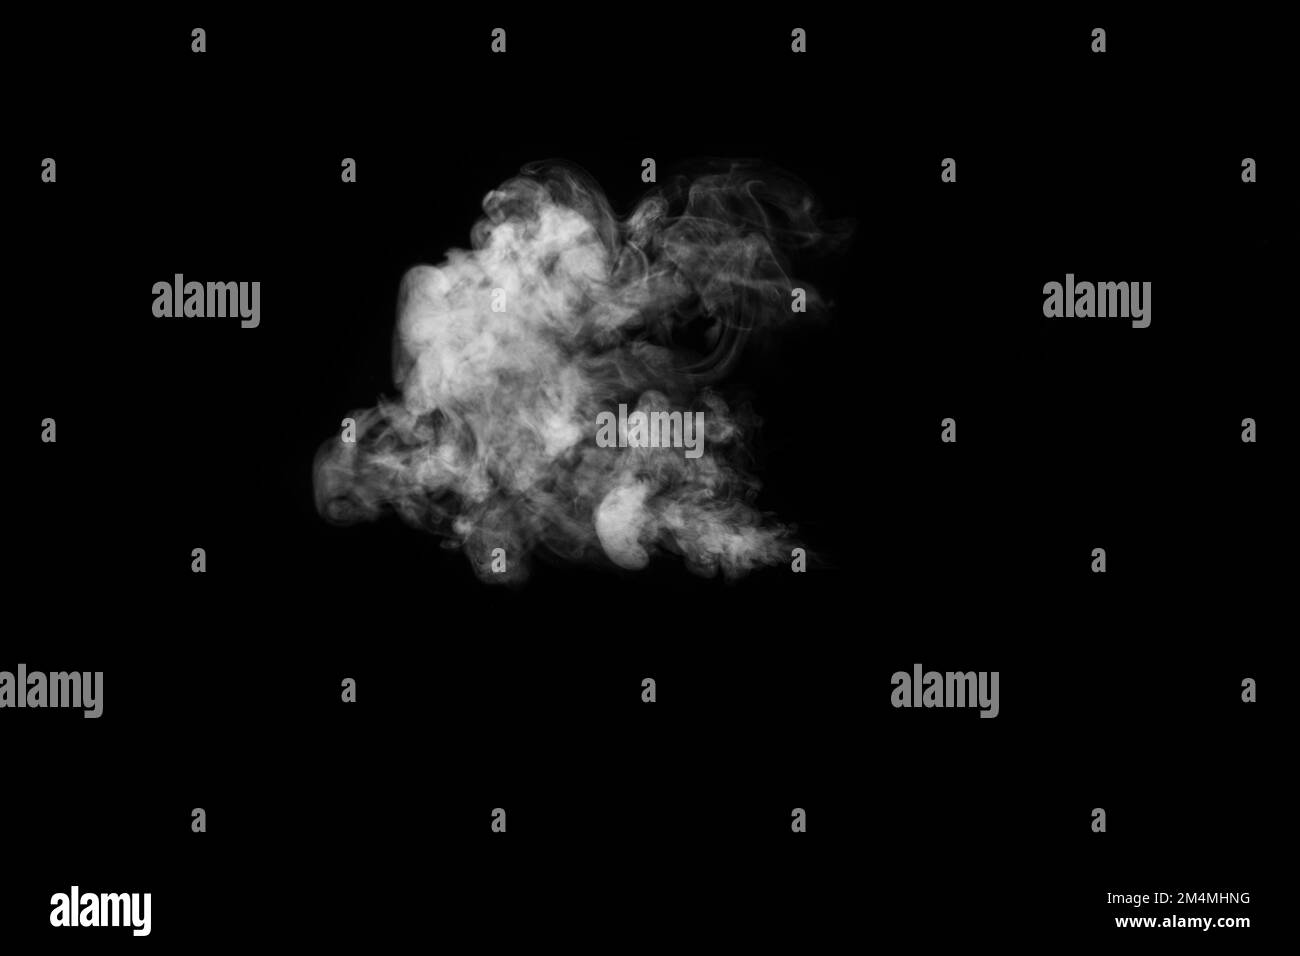 White smoke vapor in the form of a flying cloud is isolated on a black background to overlay your photos. Smoky background. Design element Stock Photo